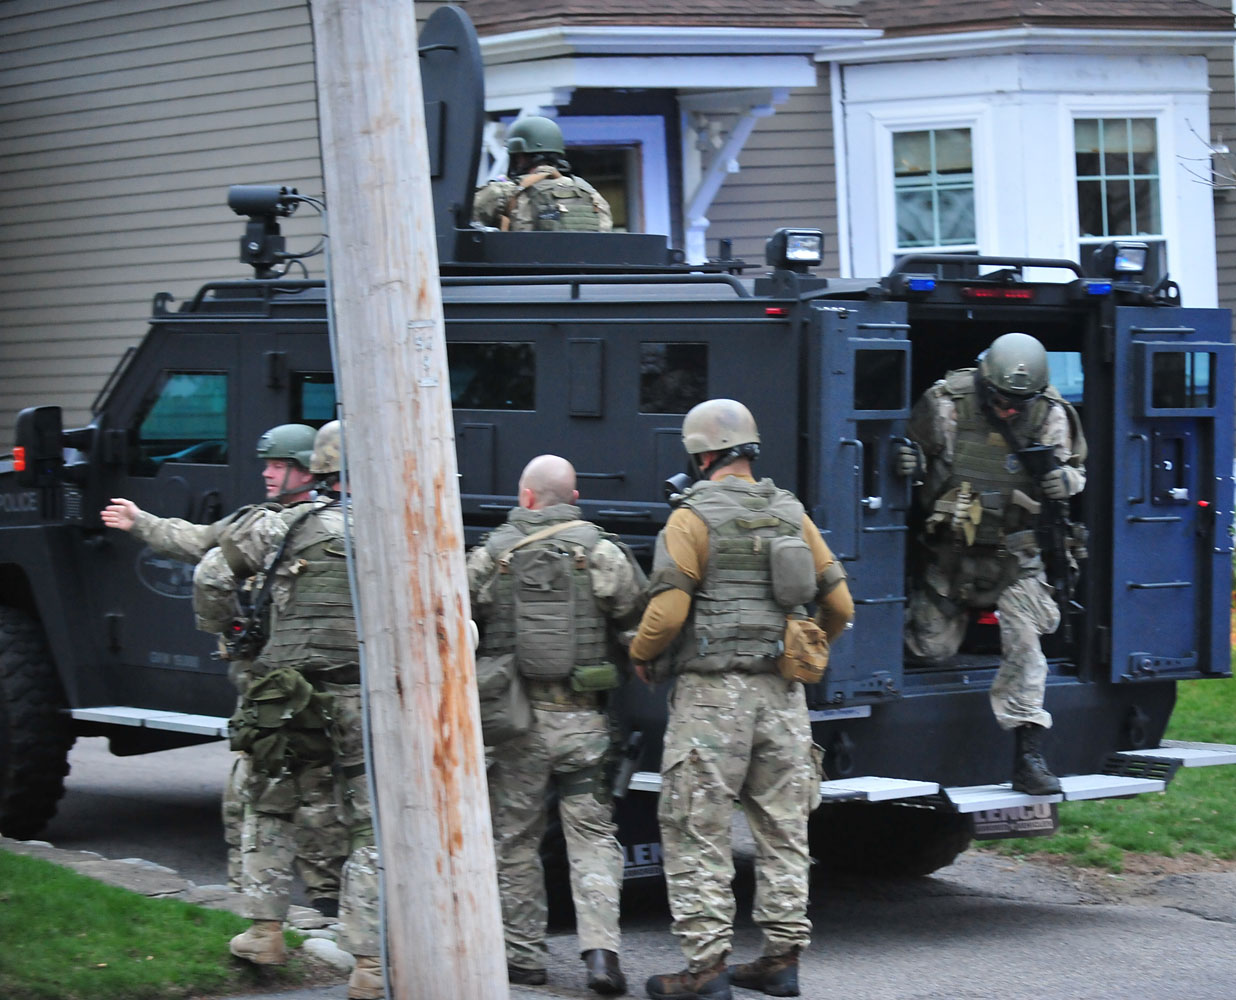 6:15.04 p.m.  Massachusetts State Police troopers prepare for the final assault on the boat where Tsarnaev was hiding.